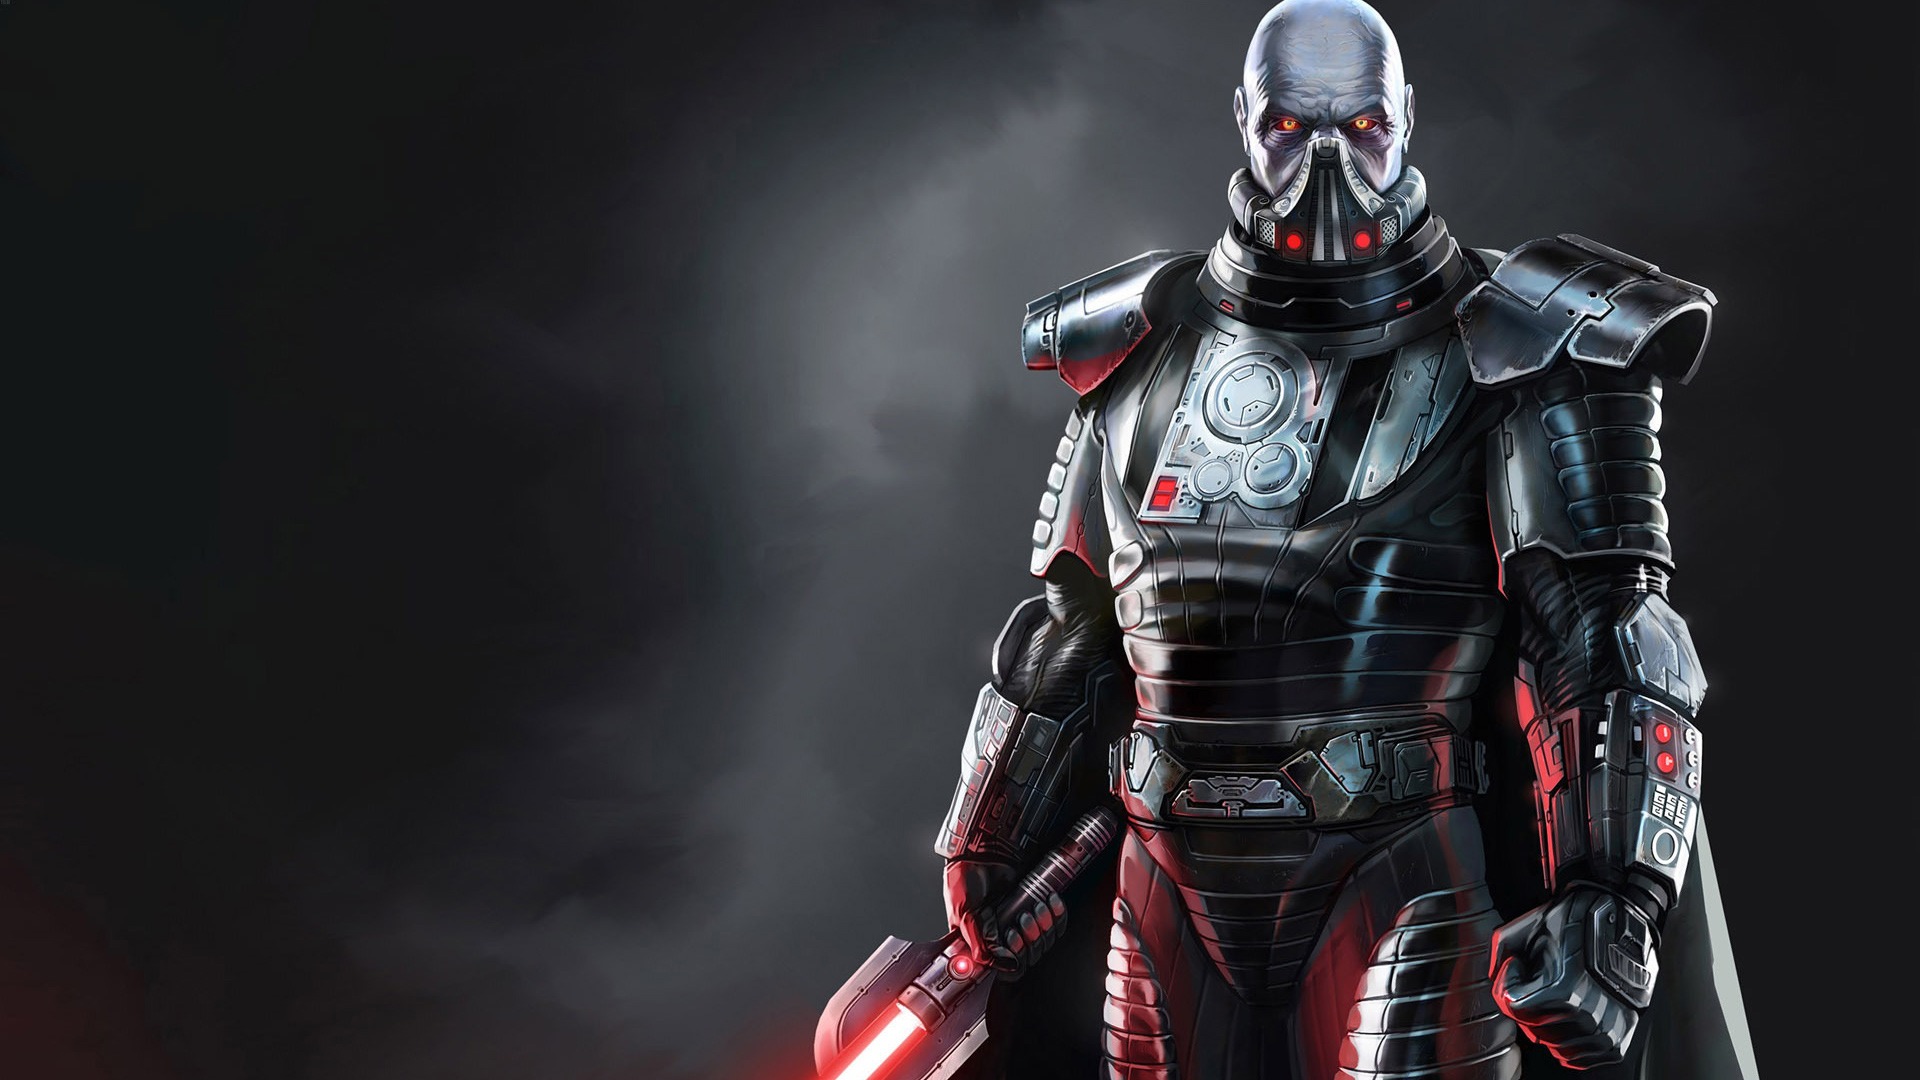 star wars sith wallpaper,action figure,fictional character,armour,superhero,toy